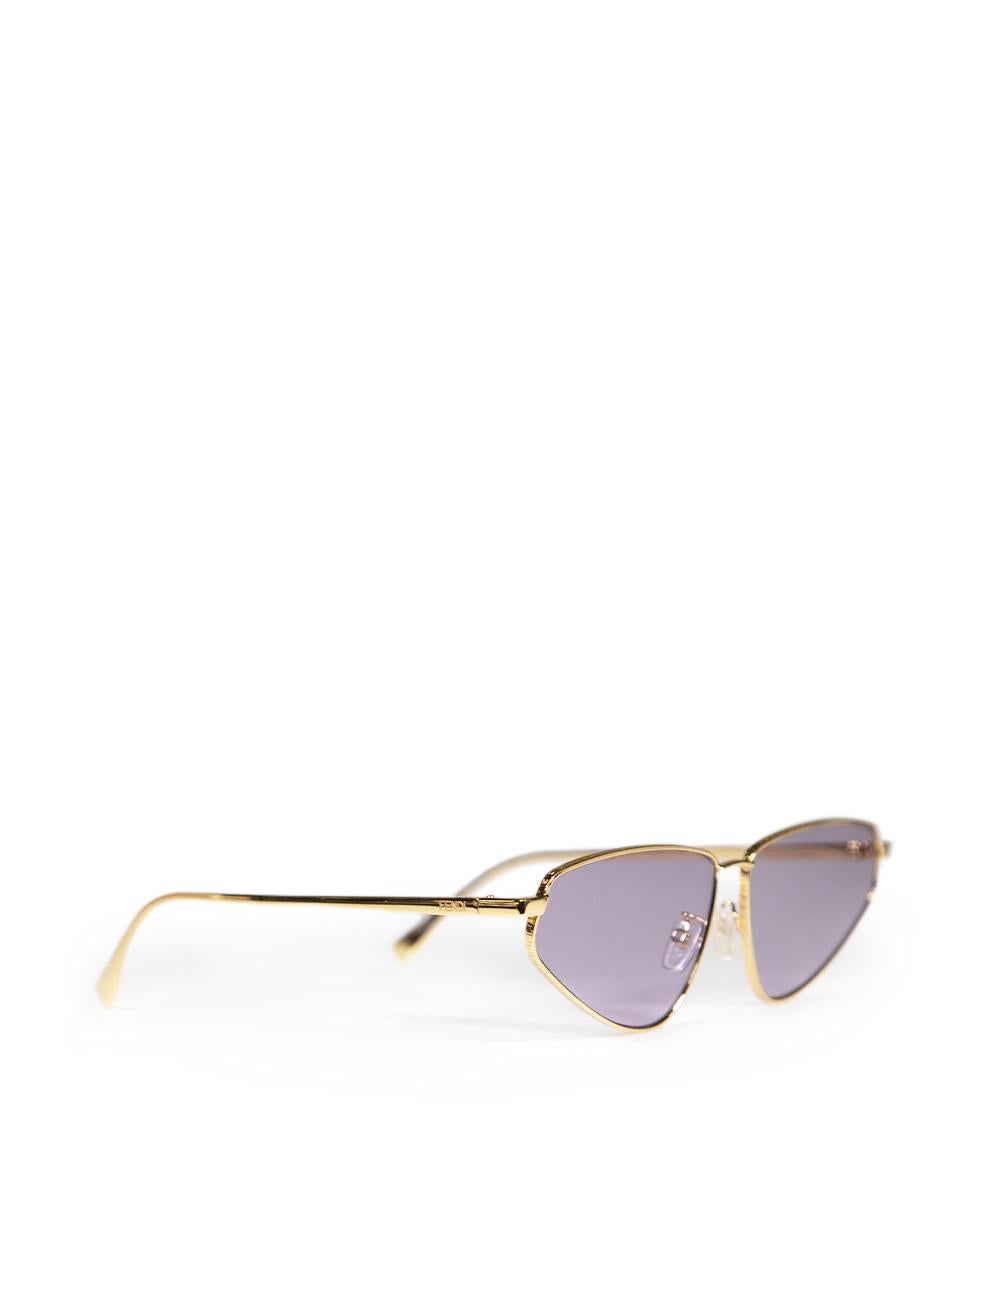 Fendi Shiny Endura Gold Metal Cat Eye Sunglasses In New Condition For Sale In London, GB